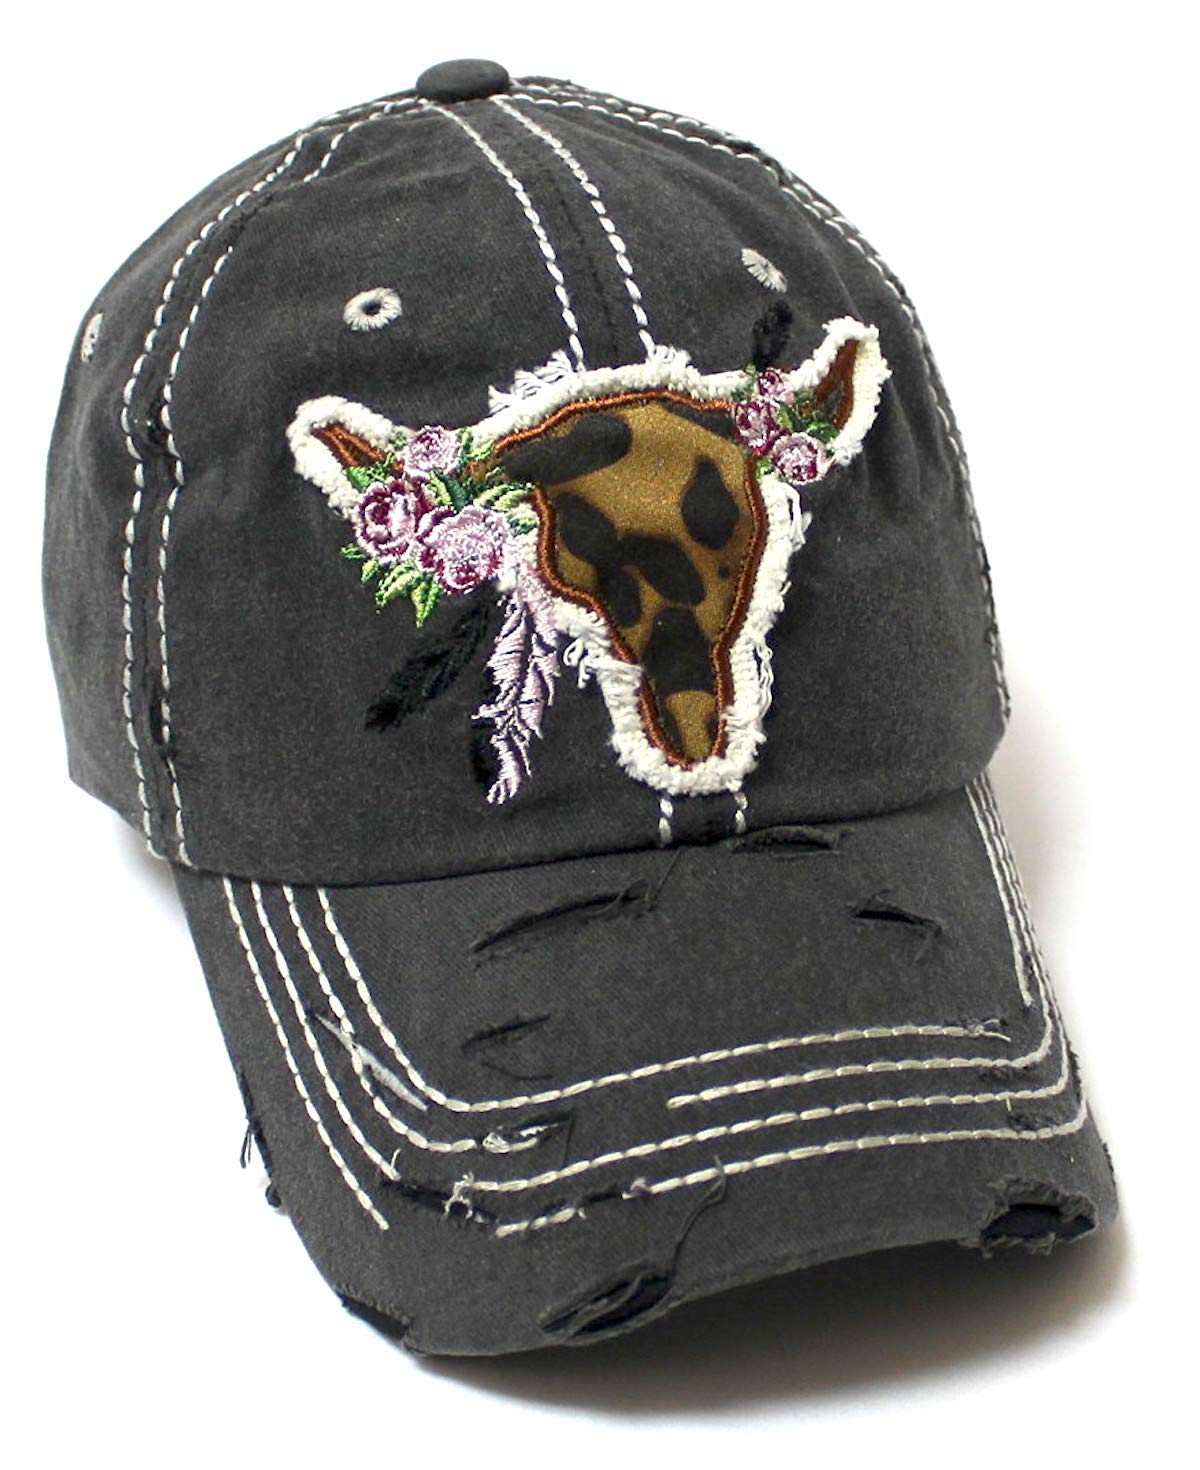 Women's Ballcap Leopard Print, Floral Cow Skull Feather Patch Embroidery Distressed Vintage Hat, Black - Caps 'N Vintage 